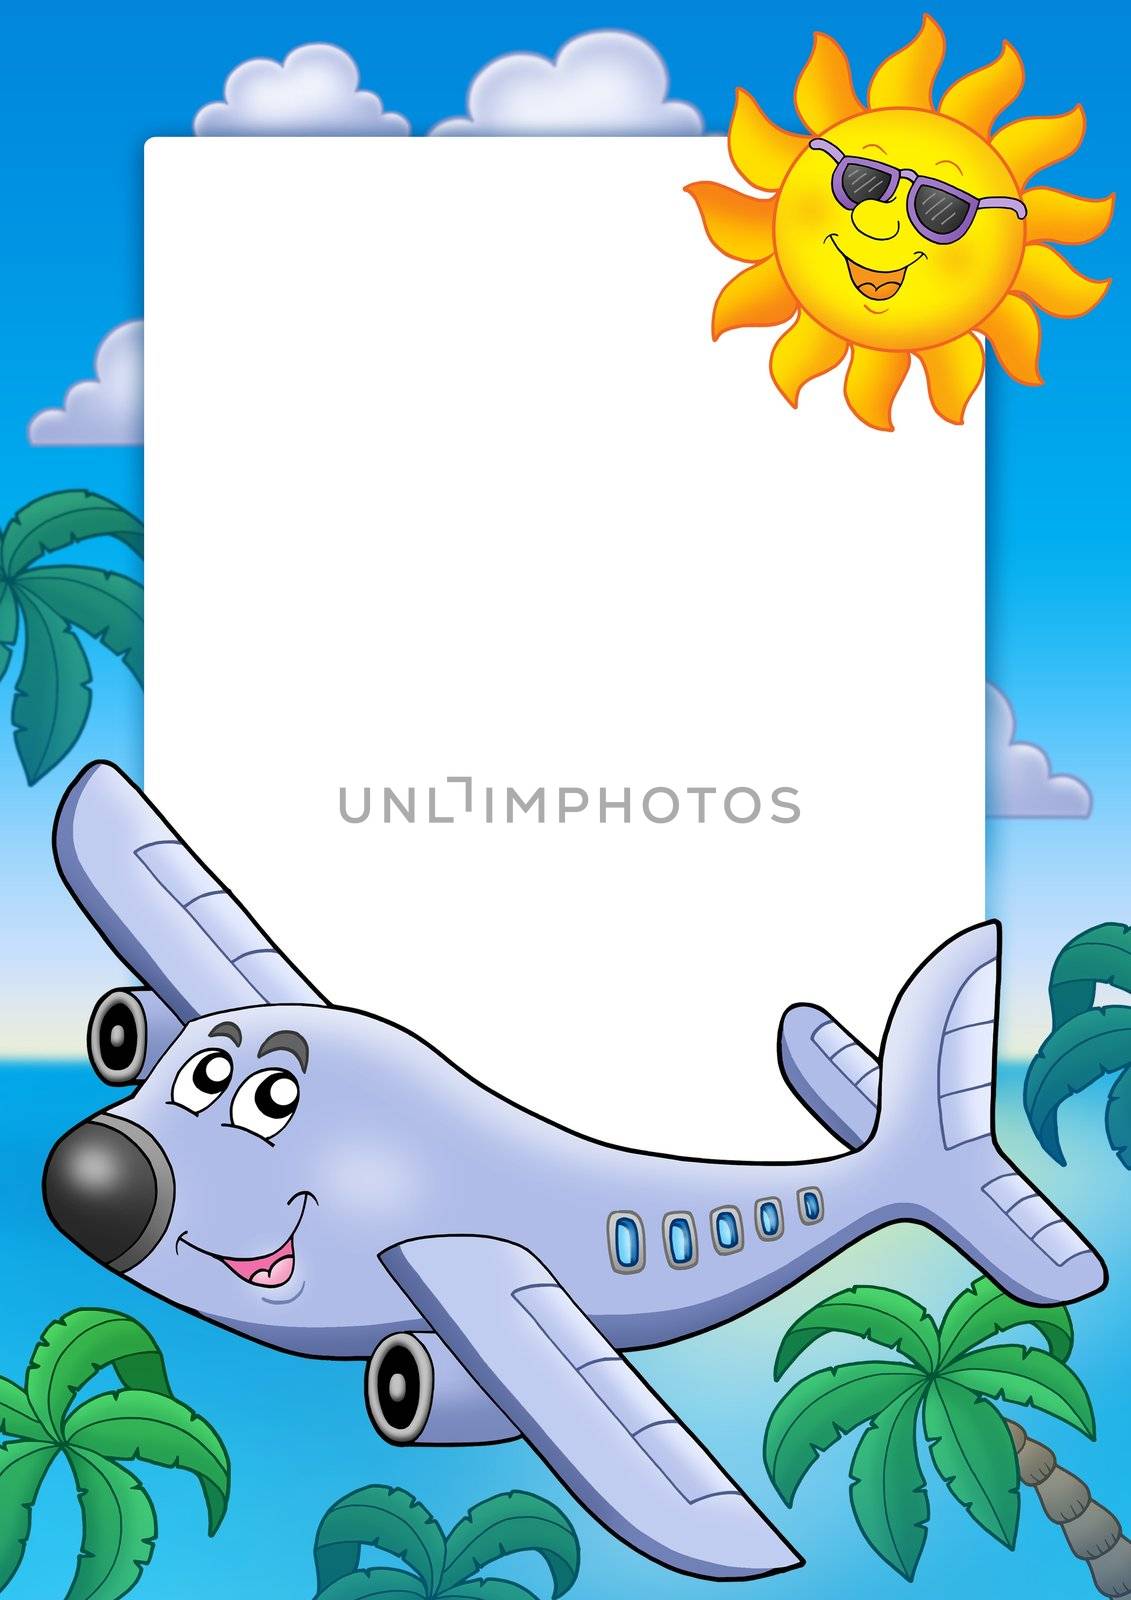 Frame with Sun and airplane - color illustration.